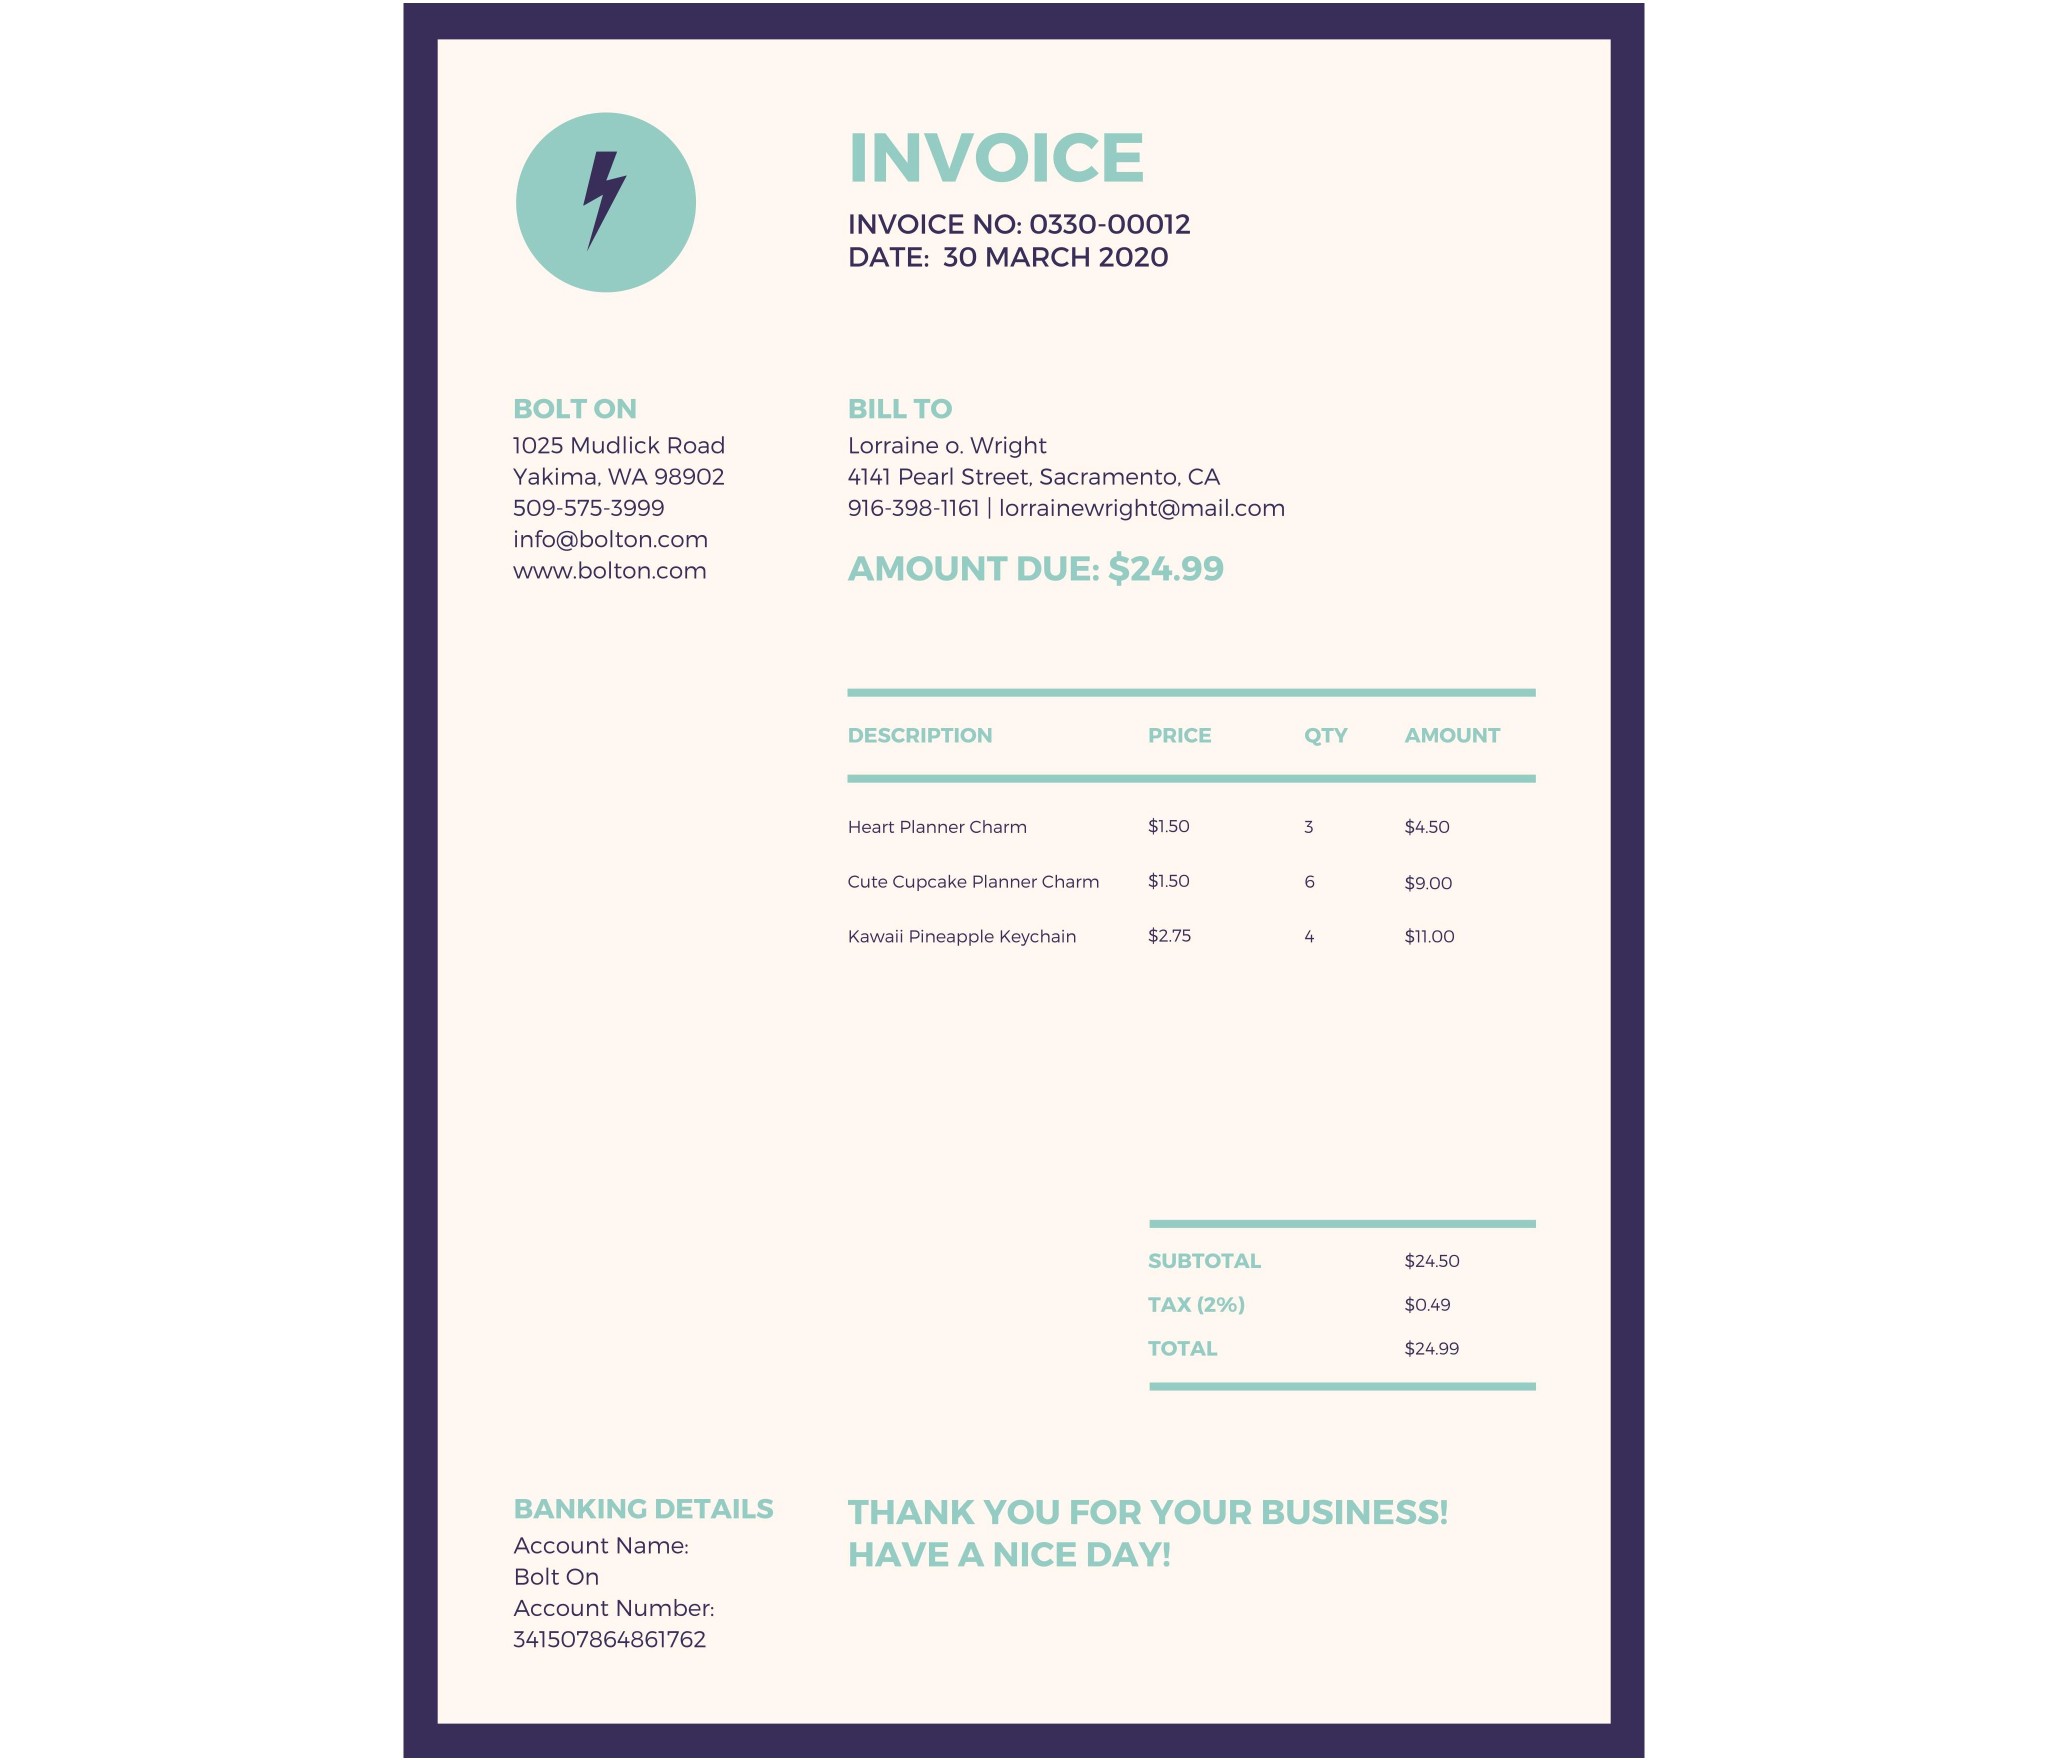 Dark Violet and Pale Teal Business Invoice Letterhead